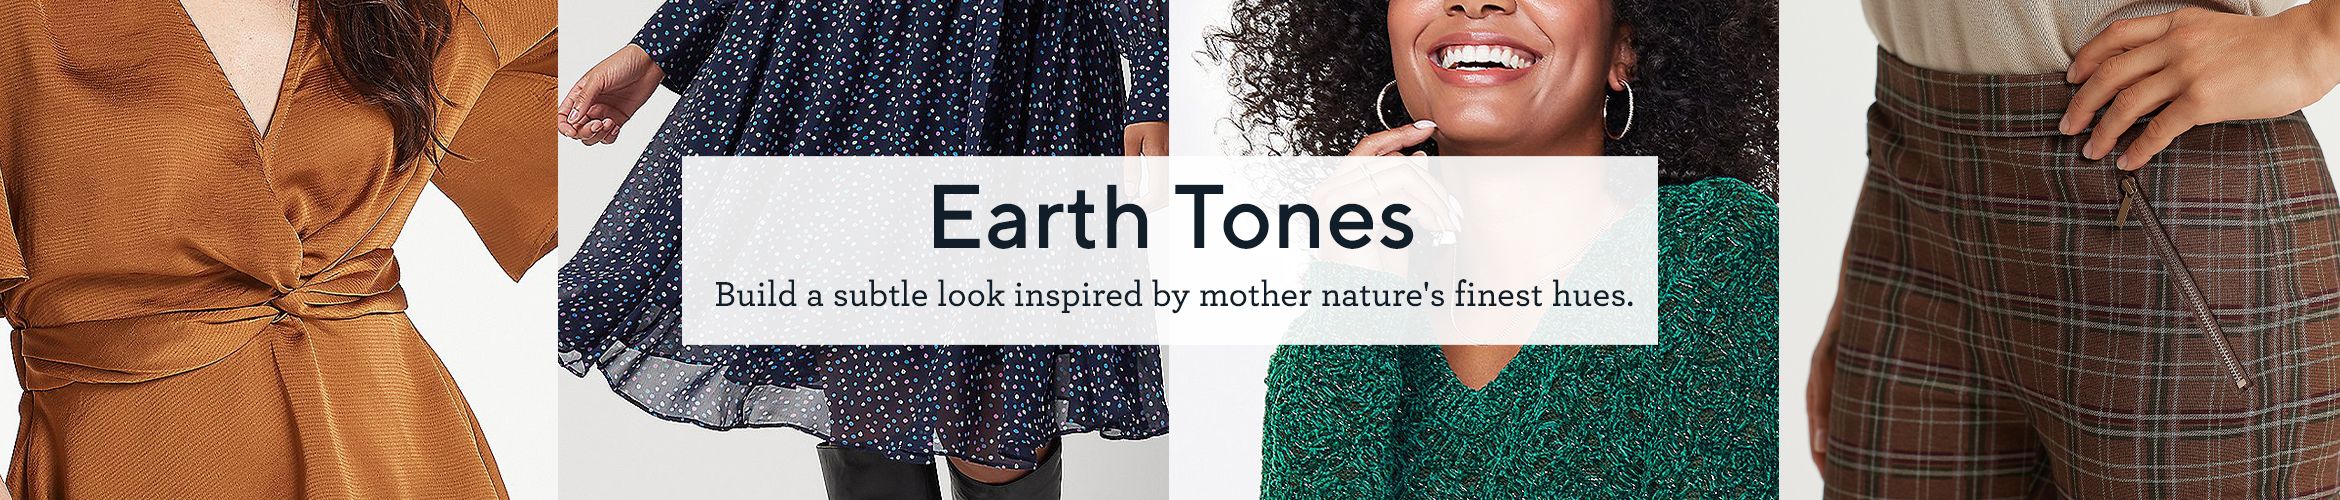 Earth Tones.  Build a subtle look inspired by mother nature's finest hues.